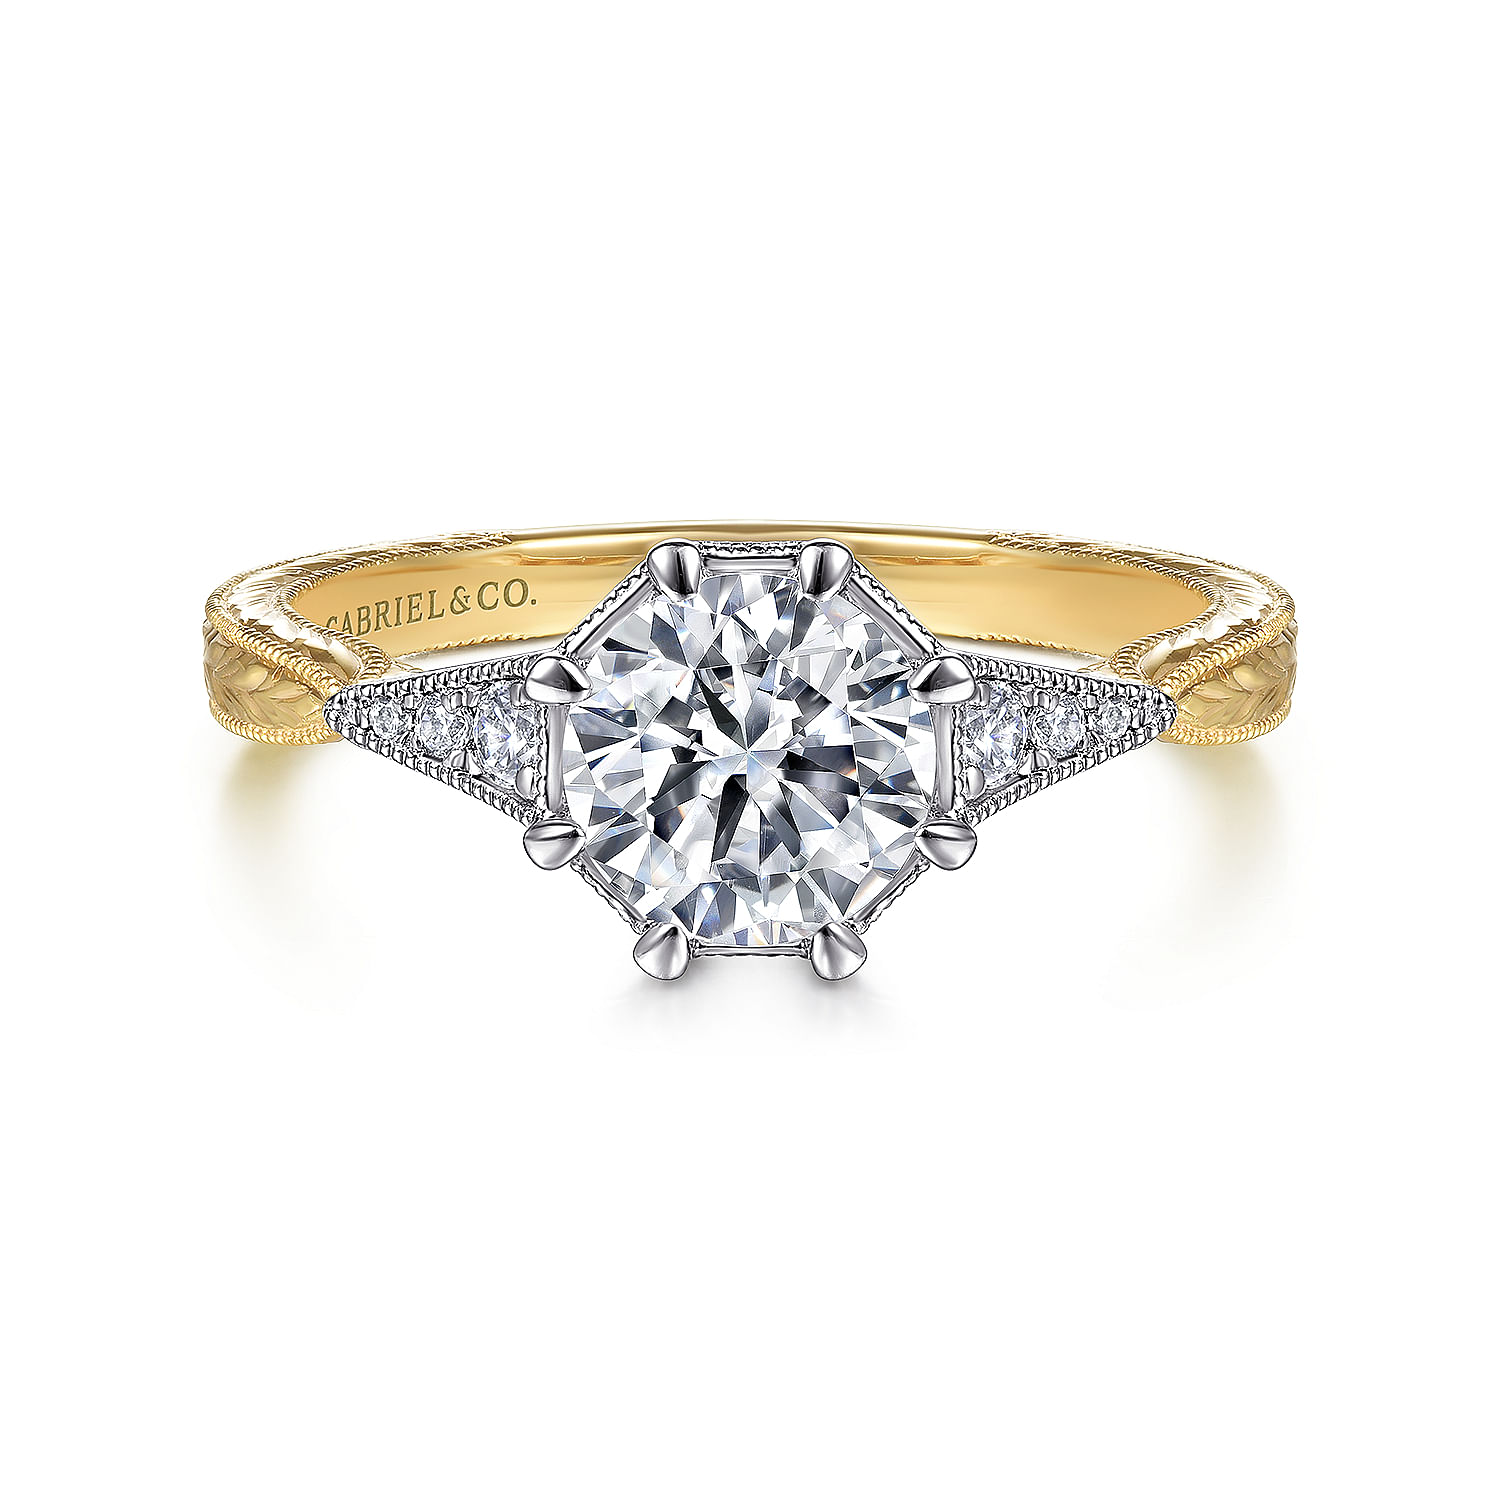 Vintage Inspired 14K White-Yellow Gold Round Diamond Channel Set Engagement Ring